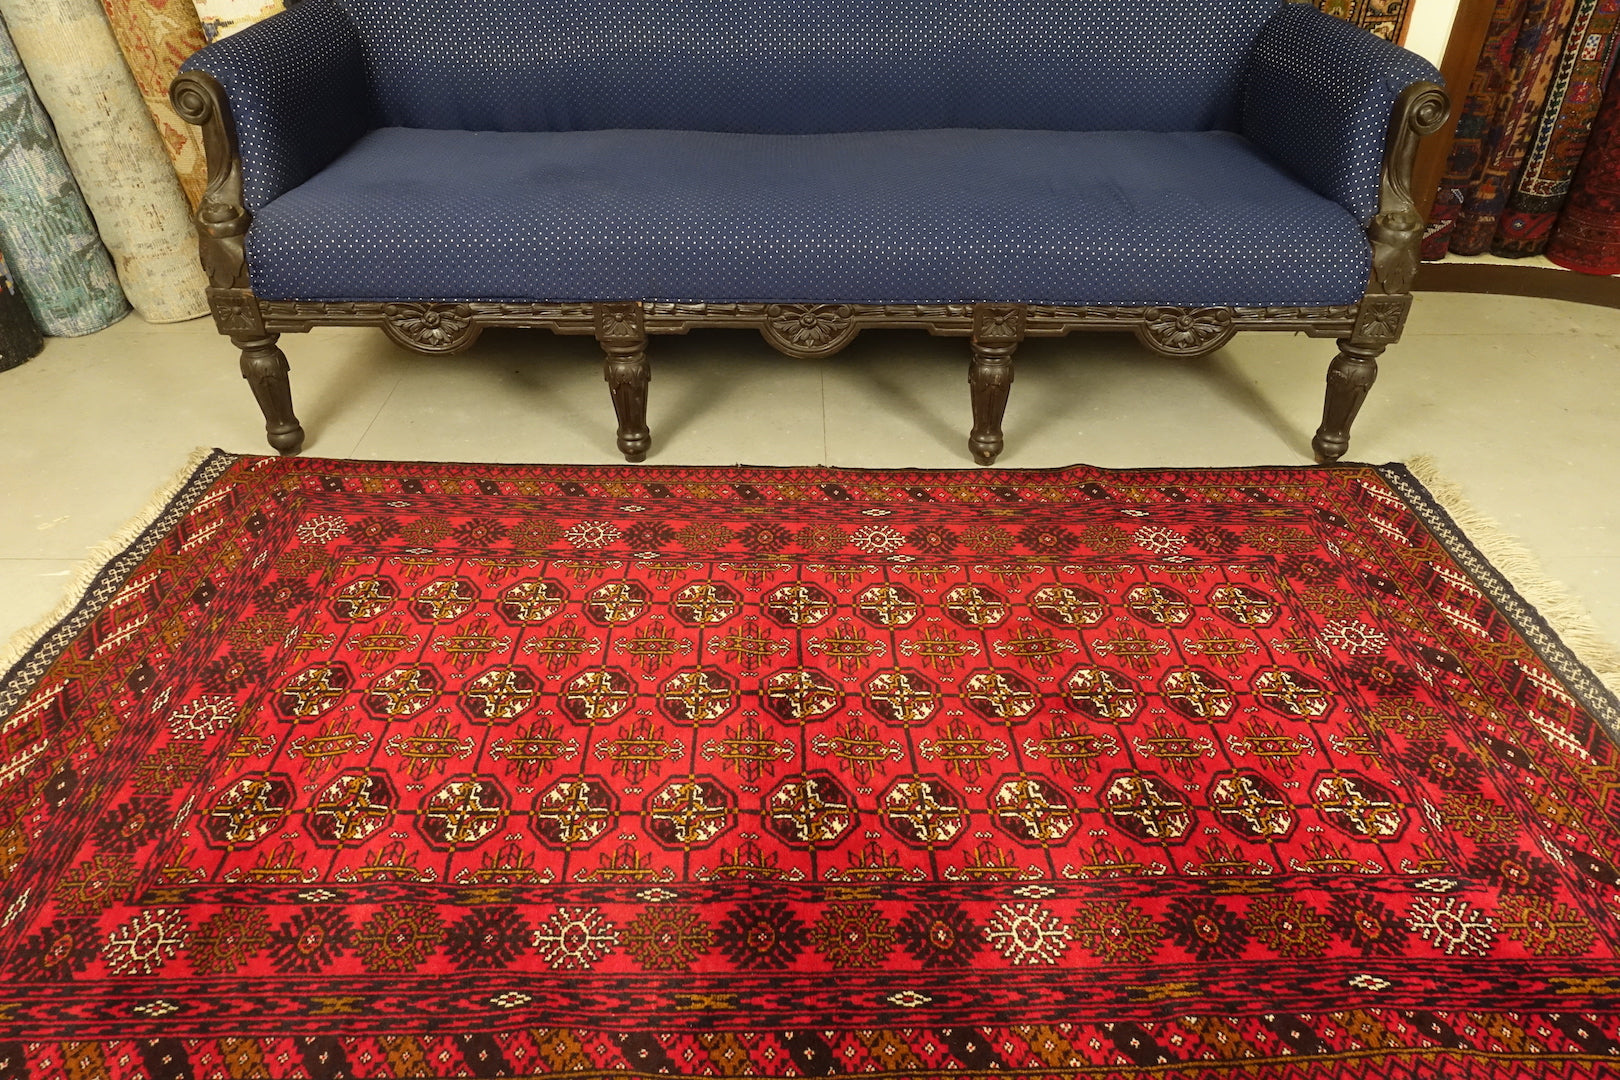 A 4 feet by 6.5 feet Afghan wool rug, the colours used on the rug are red,blue,beige and rust.